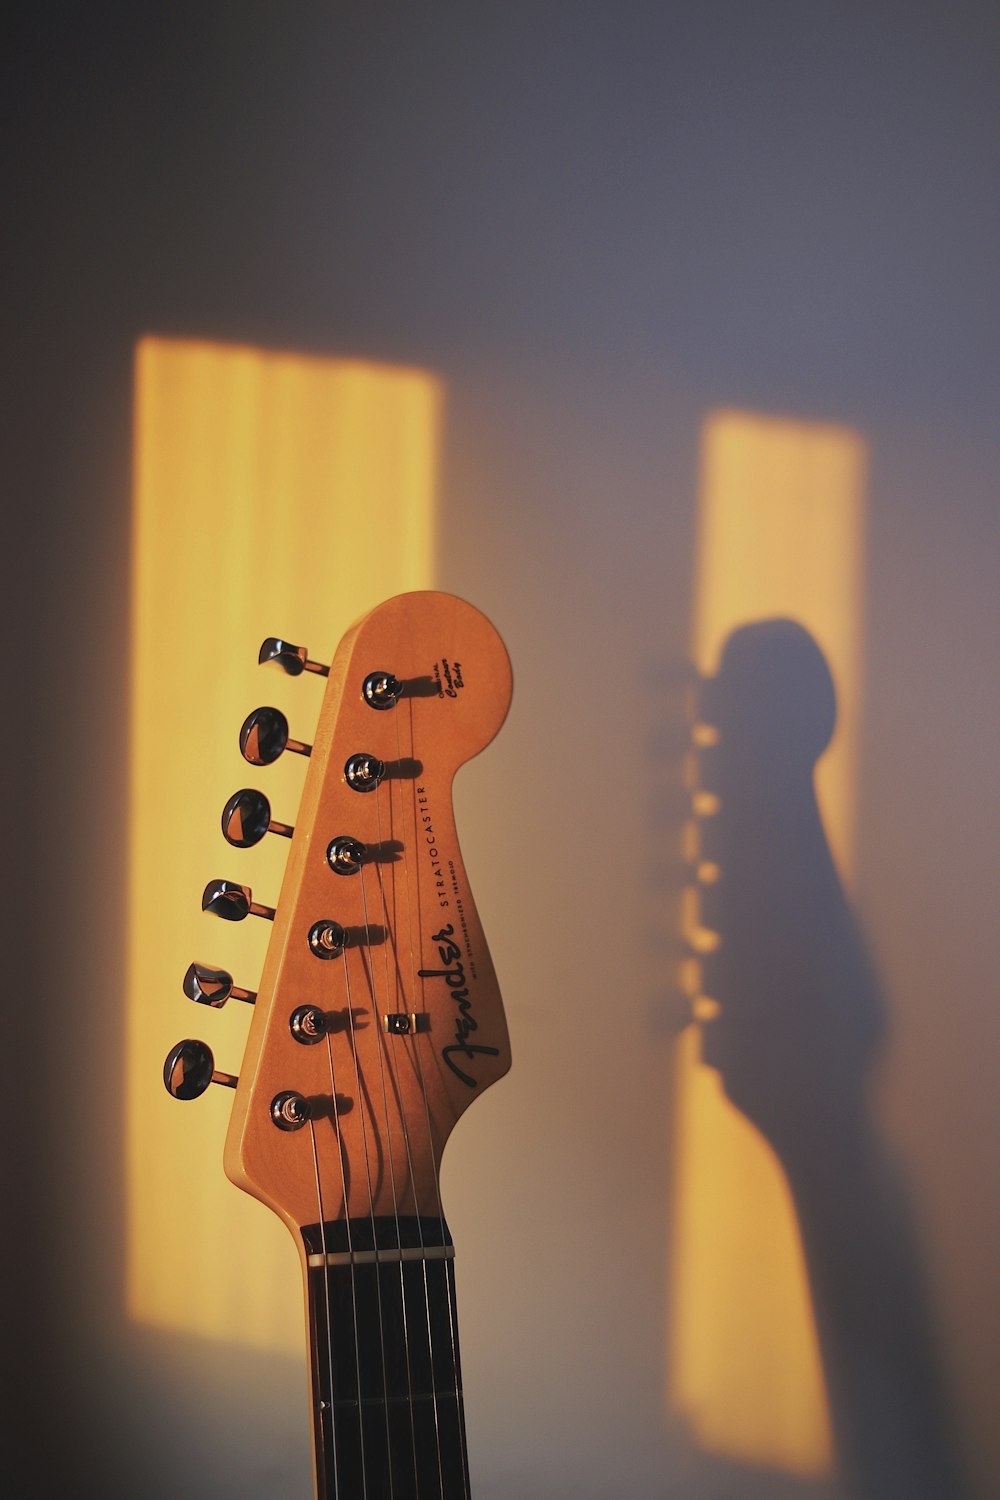 a close up of an electric guitar with a shadow on the wall